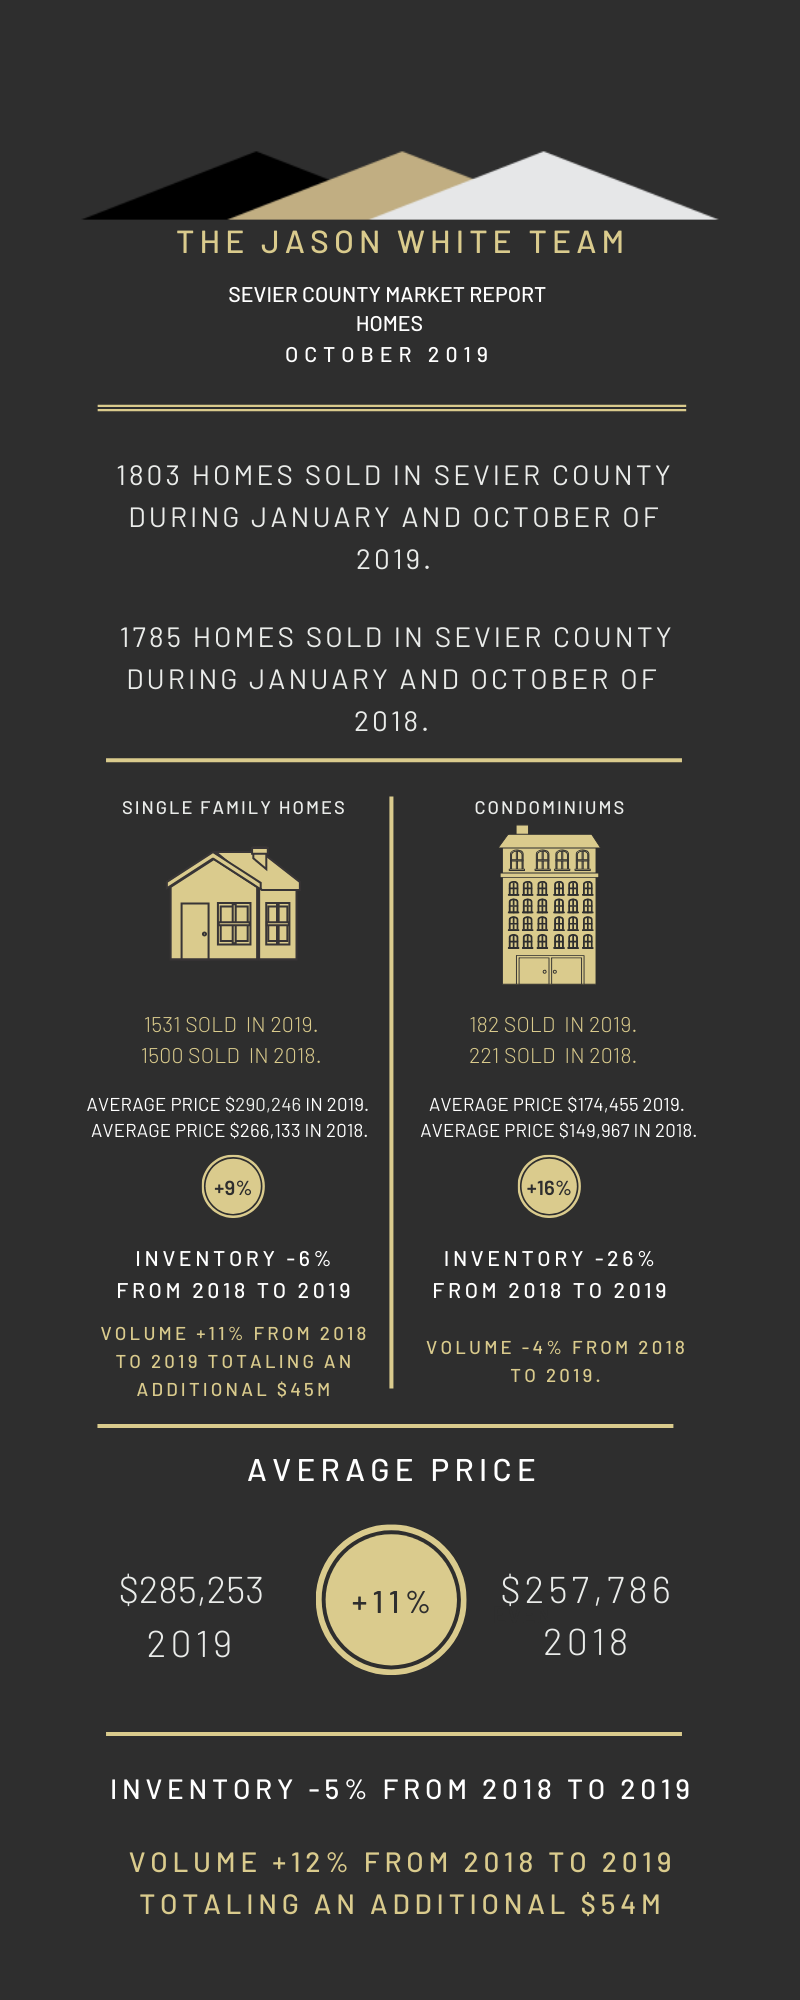 Sevier County Market Report for Homes October 2019